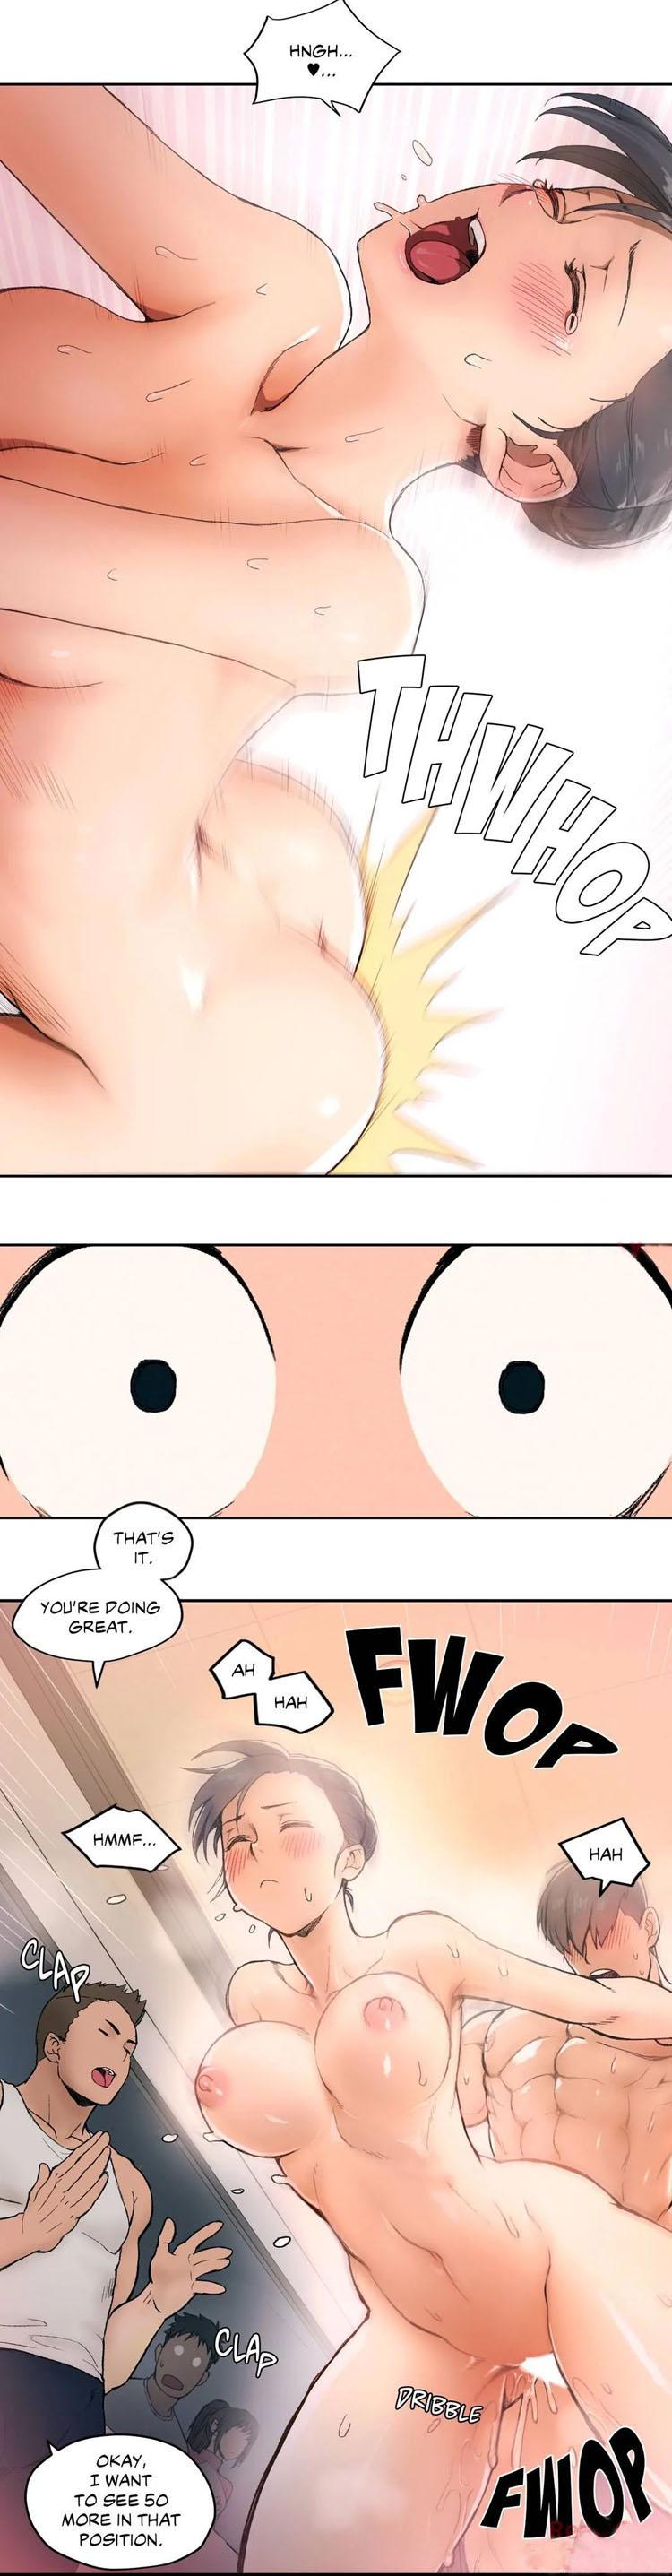 Best Blowjobs Ever Sexercise Ch.1/? Huge Boobs - Page 15